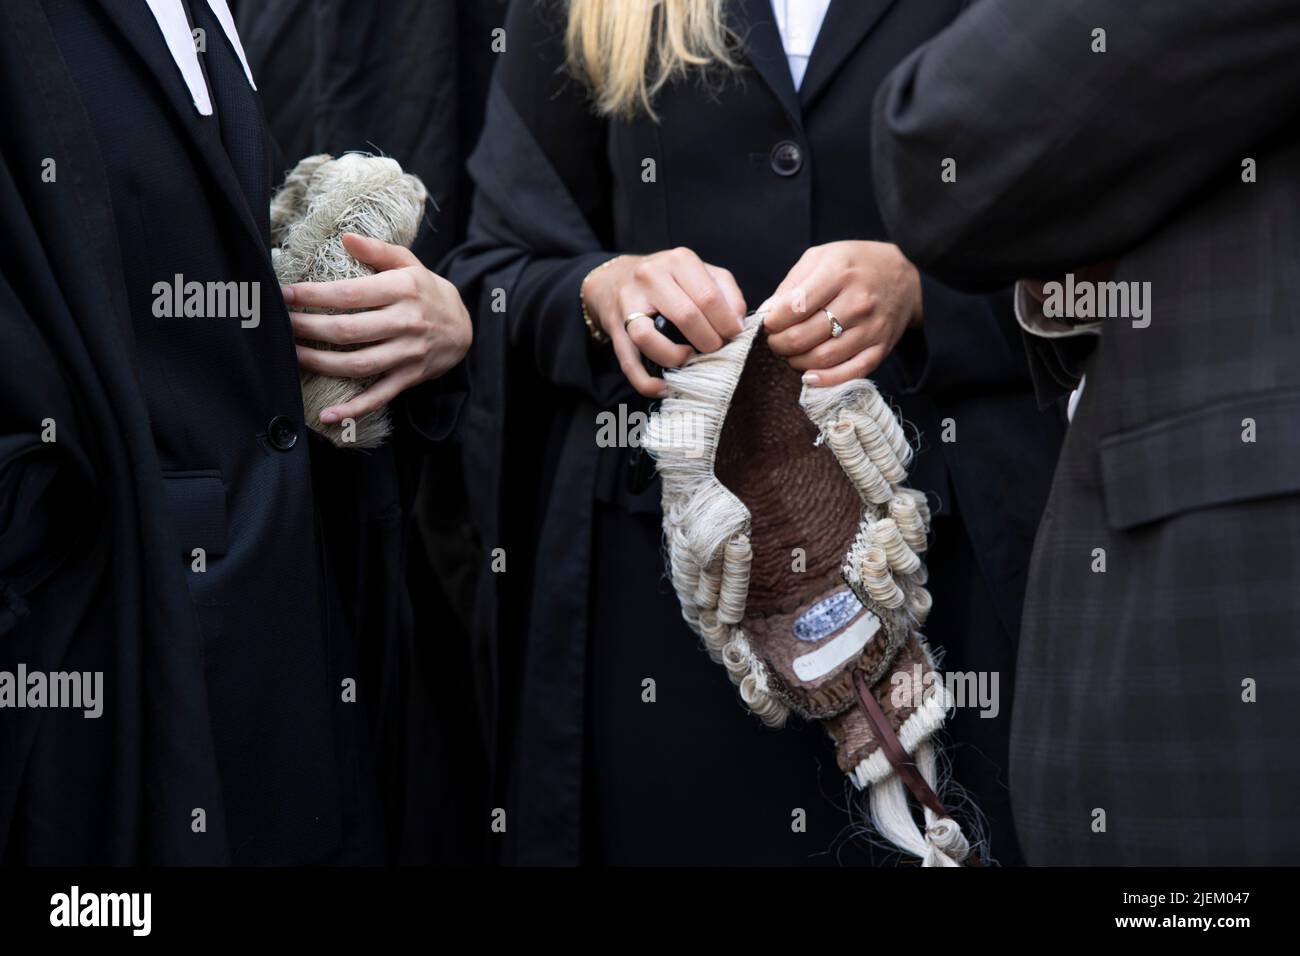 Criminal barristers are seen holding their wigs during the strike outside Old Bailey. Criminal barristers walkout from courts in strike around the UK over dispute in pay. The Criminal Bar Association (CBA) said incomes for junior criminal barristers have fallen 30% over the last 20 years and standing at average income after expenses of £12200 in the first 3 years of practice. They demand a 25% uplift in legal aid fee, which is more than the 15% minimum recommended by the Criminal Legal Aid Review published in last December. (Photo by Hesther Ng/SOPA Images/Sipa USA) Stock Photo